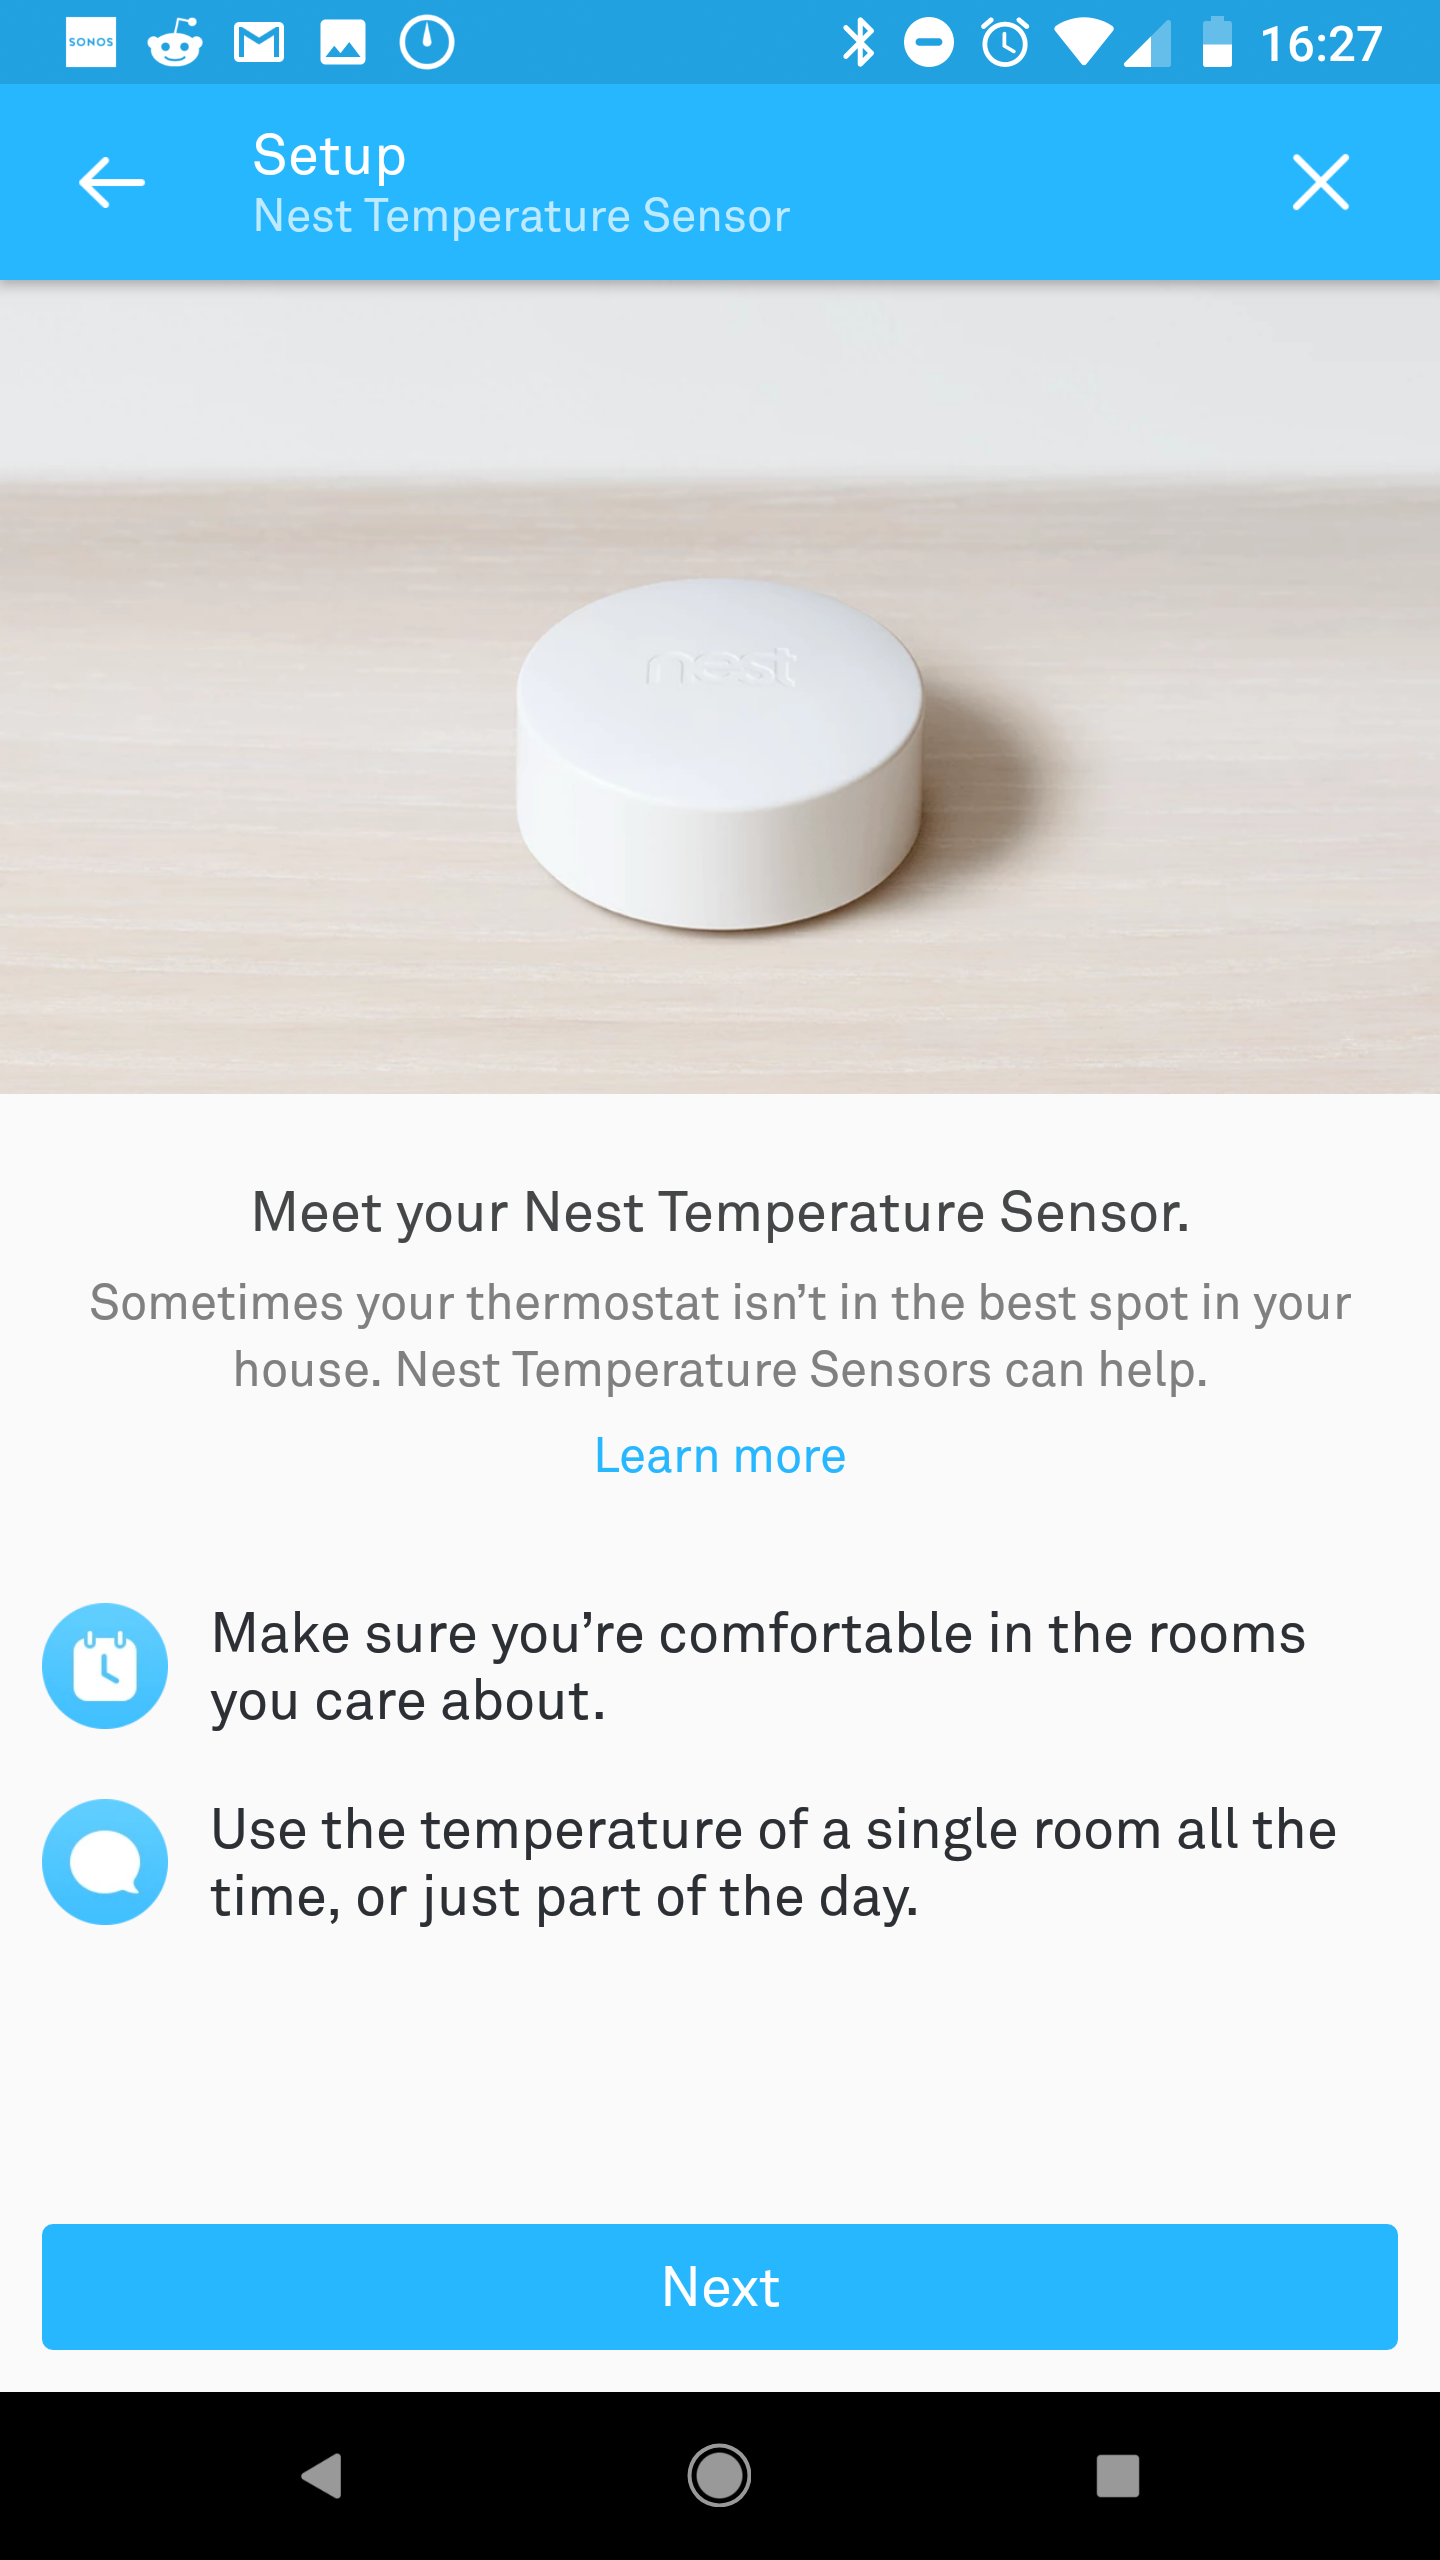 What is a smart temperature sensor - Reviewed